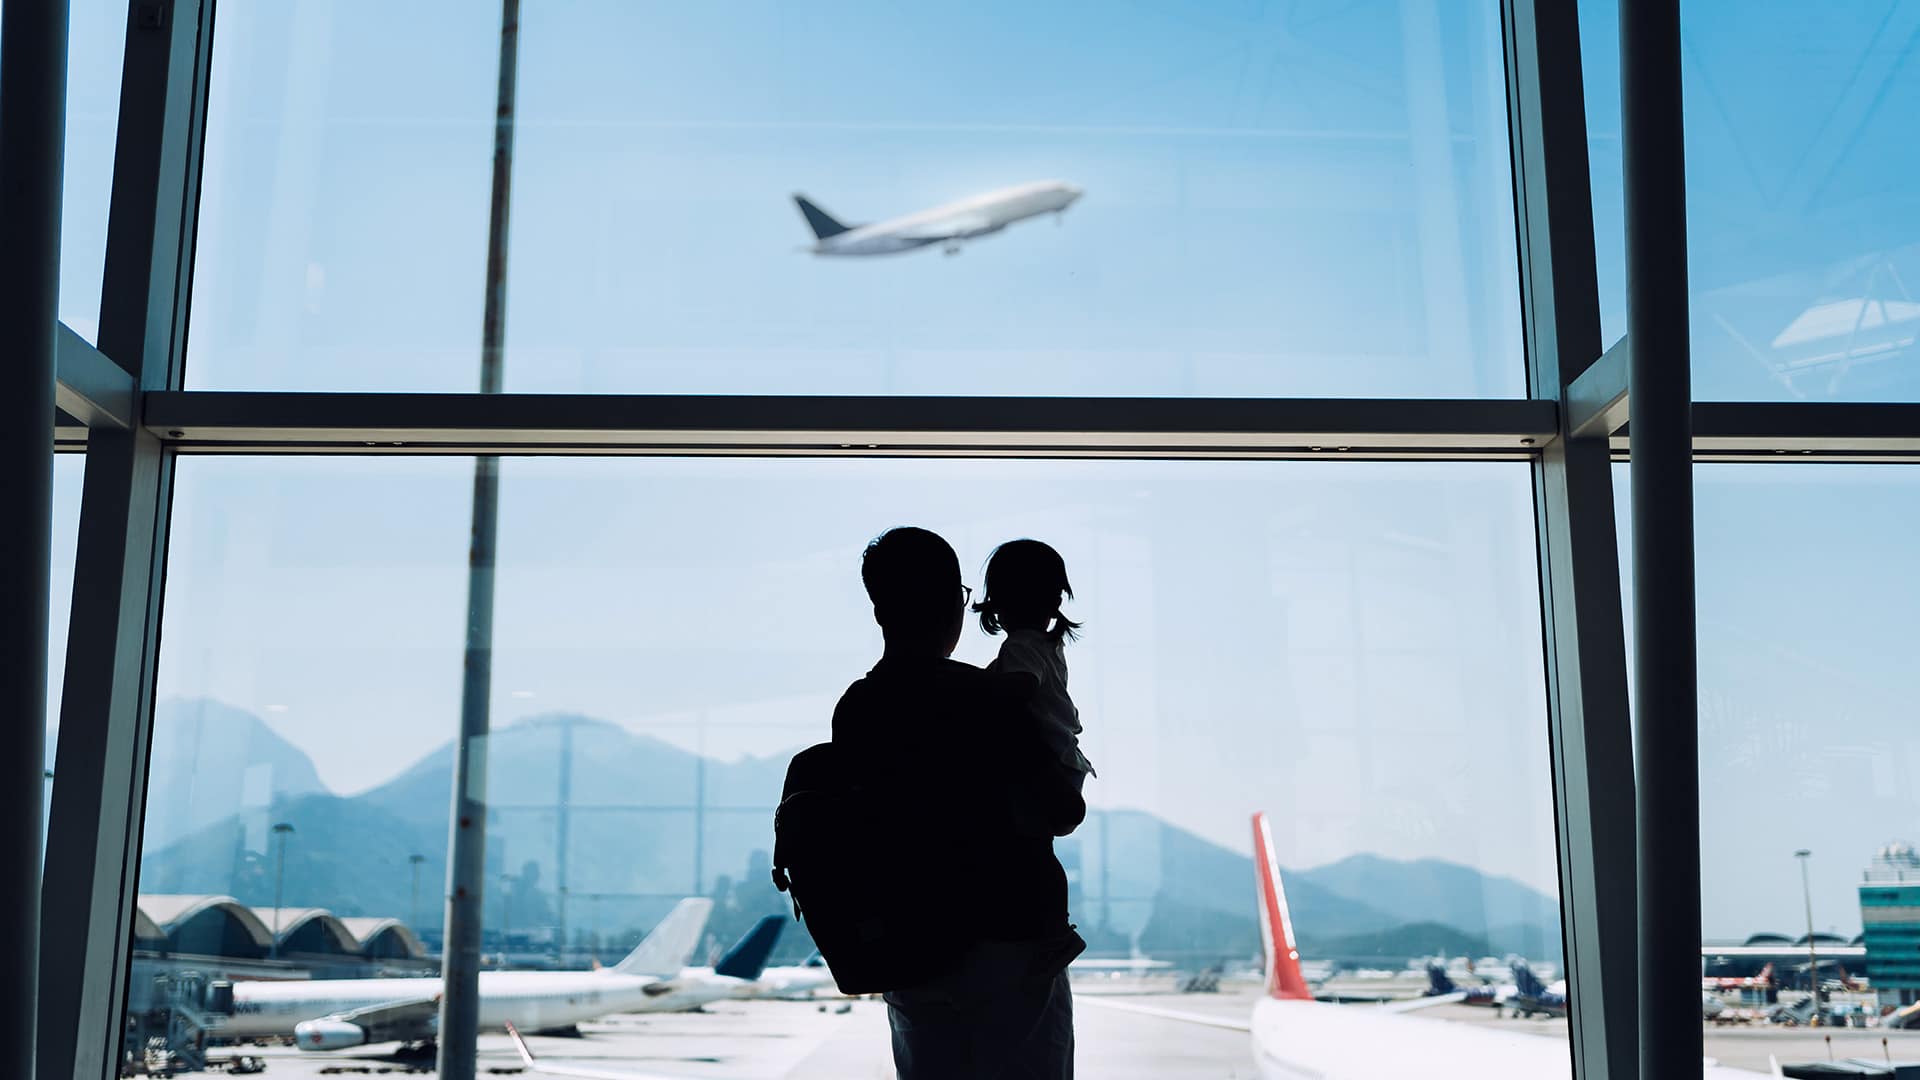 father and daughter looking at plane in airport